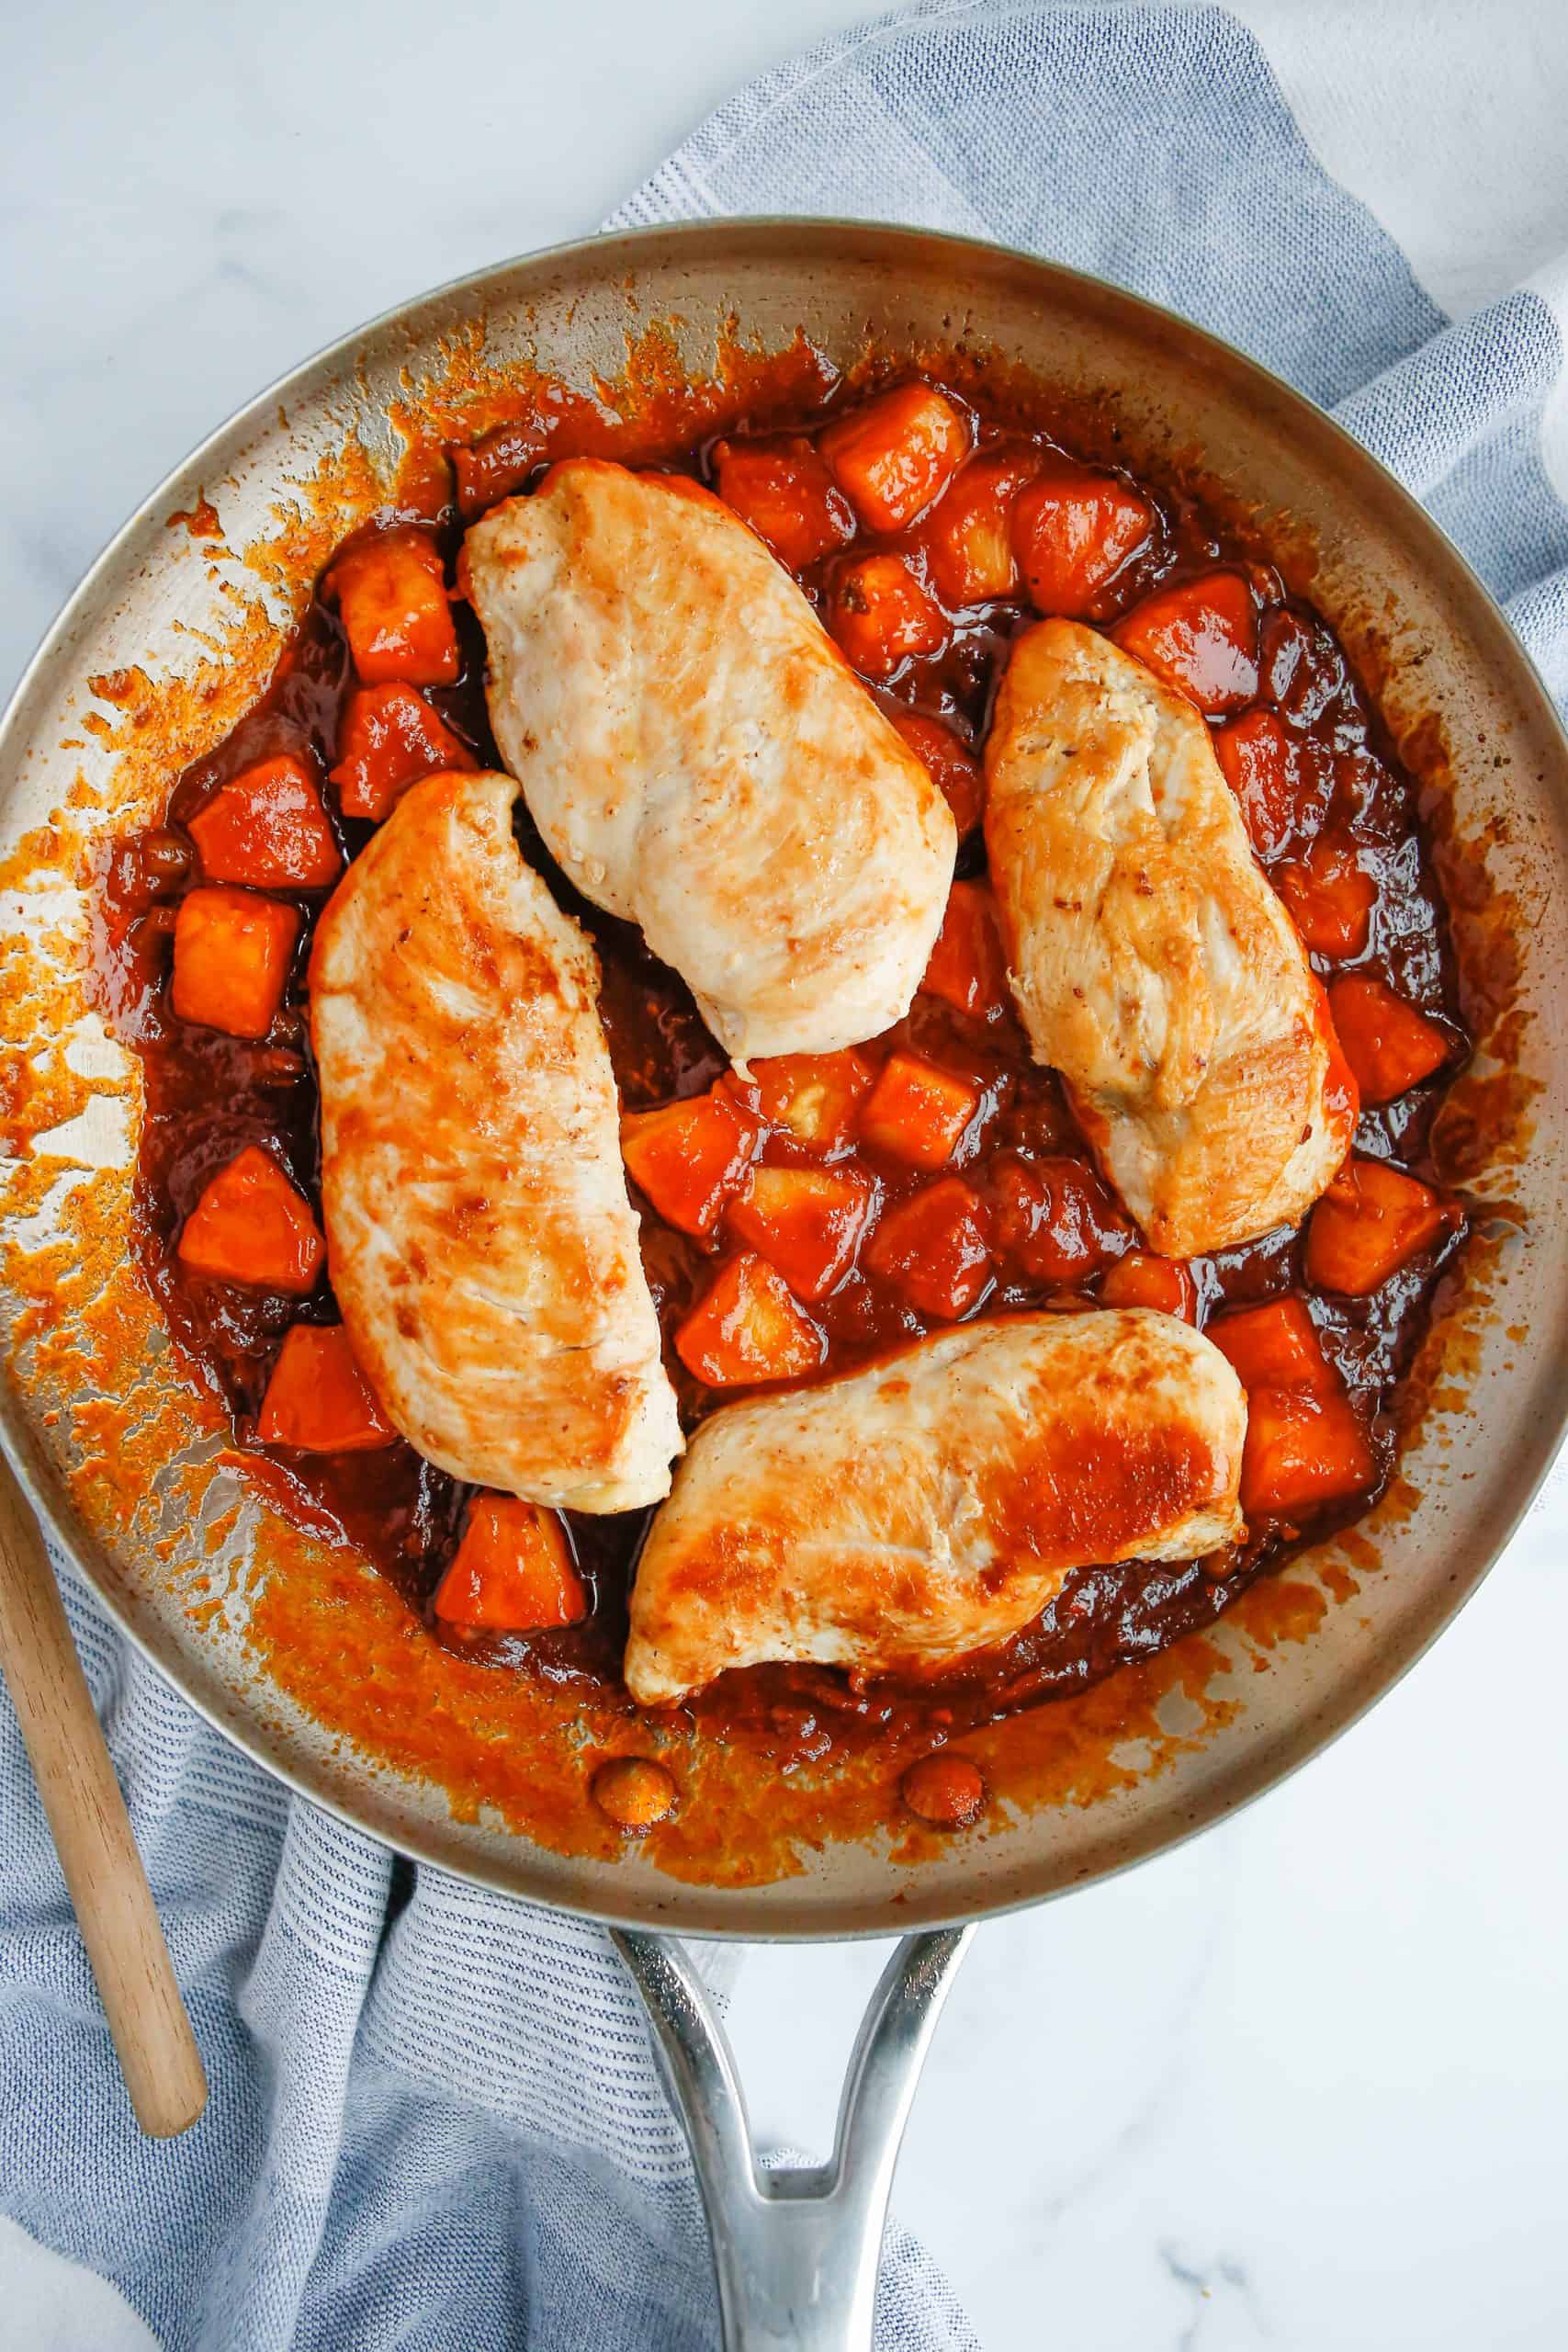 Chicken added back to pan with other ingredients.